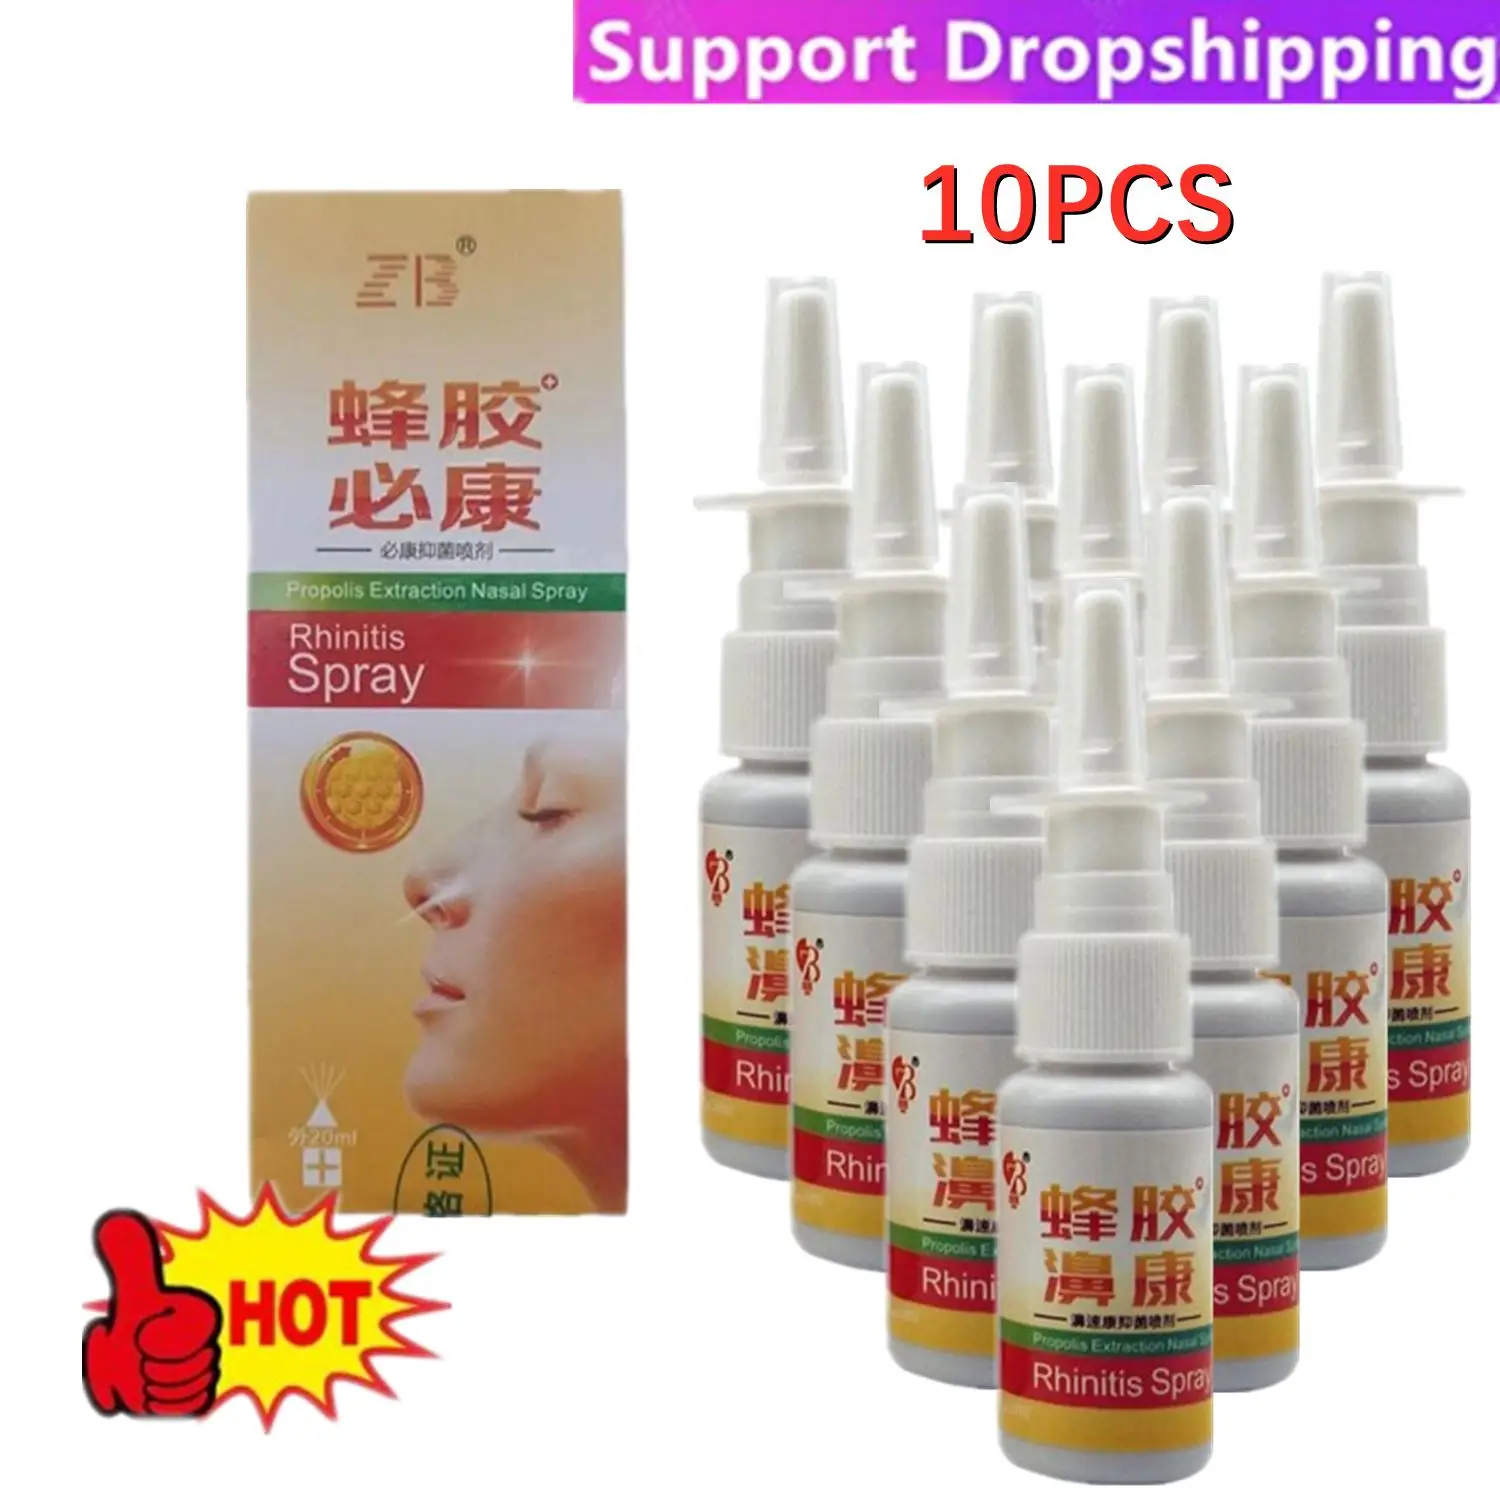 10PCS Propolis Extraction Nasal Spray Treatment Chronic Sinusitis Nasal Discomfort Nasal Drop Nose Itch Cool Herb Ointment